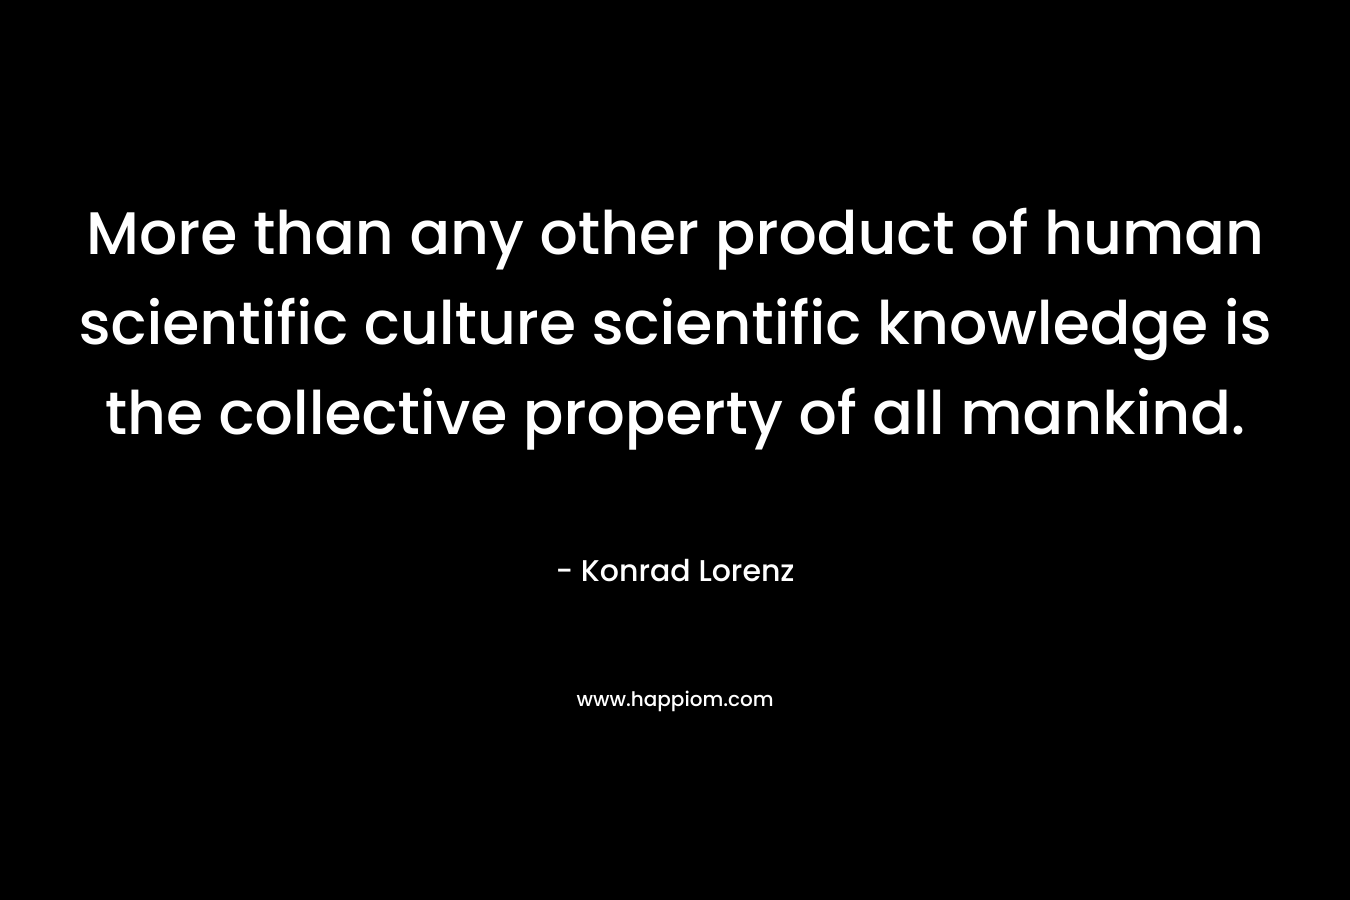 More than any other product of human scientific culture scientific knowledge is the collective property of all mankind.